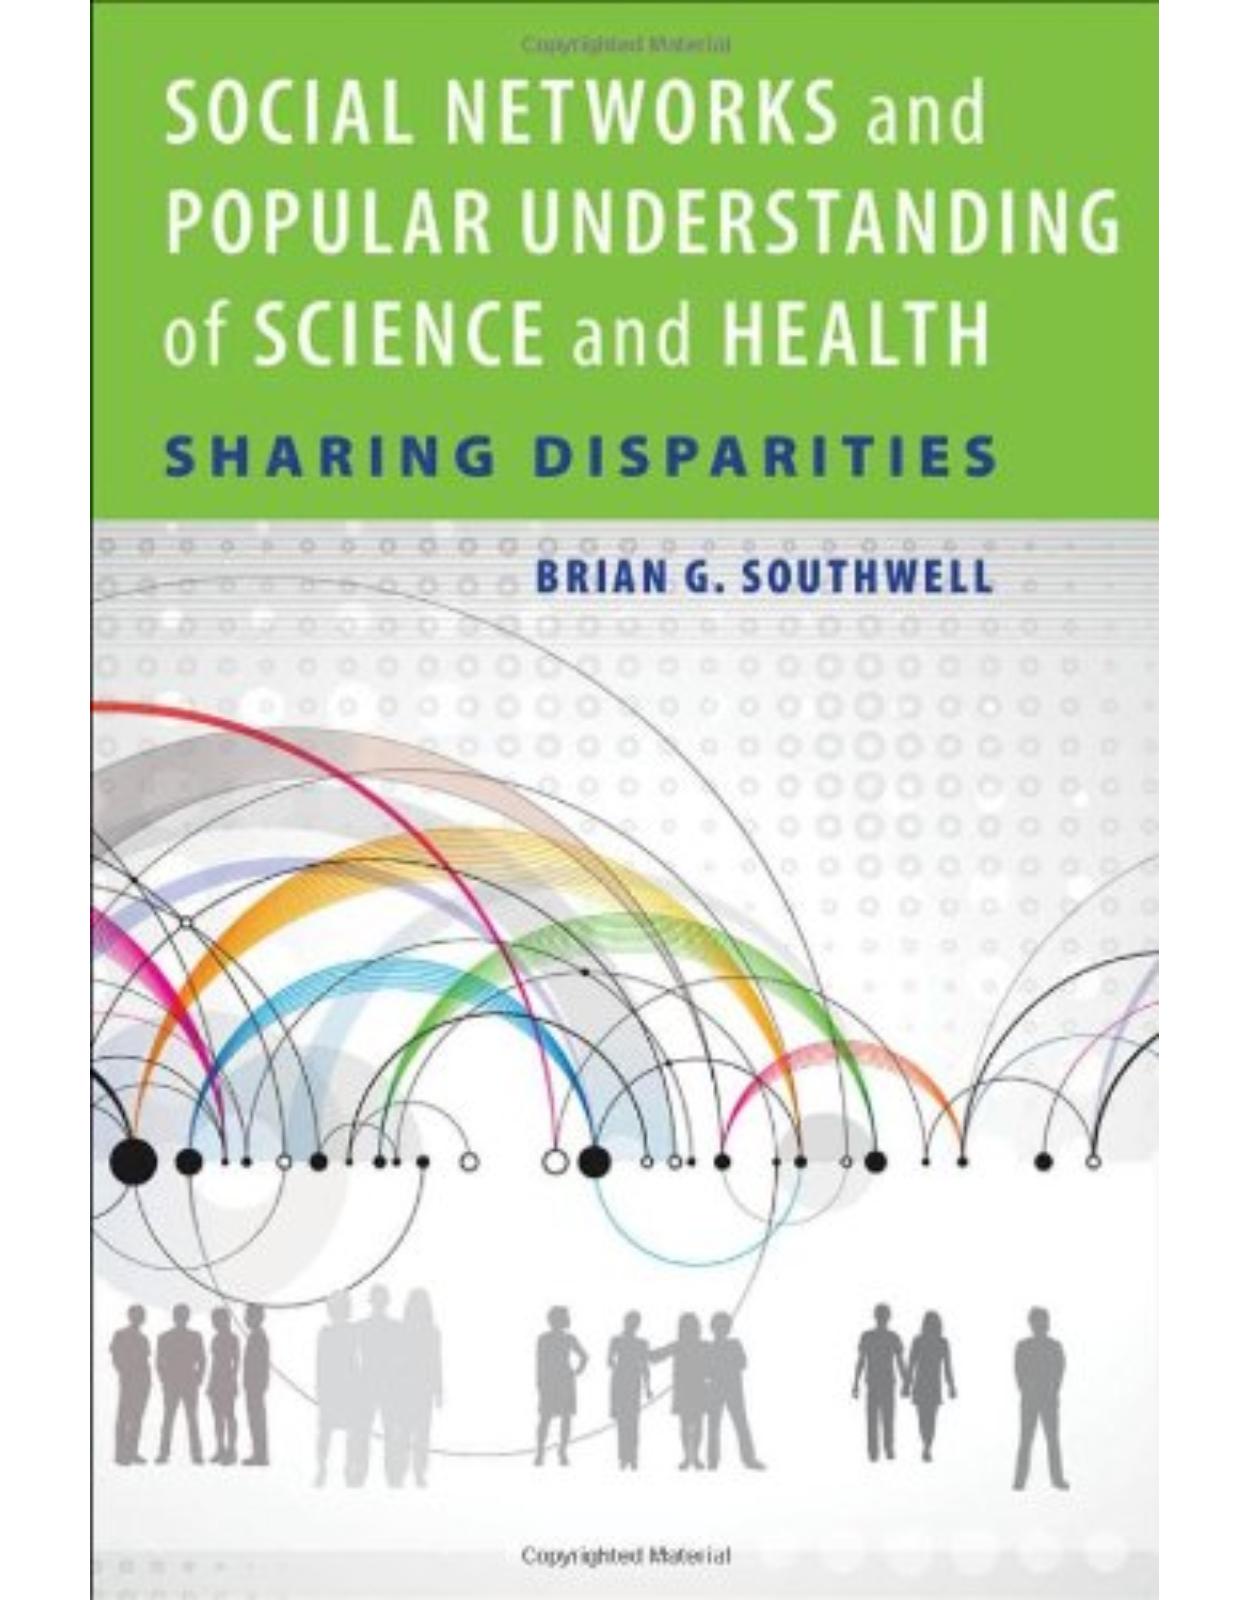 Social Networks and Popular Understanding of Science and Health, Sharing Disparities